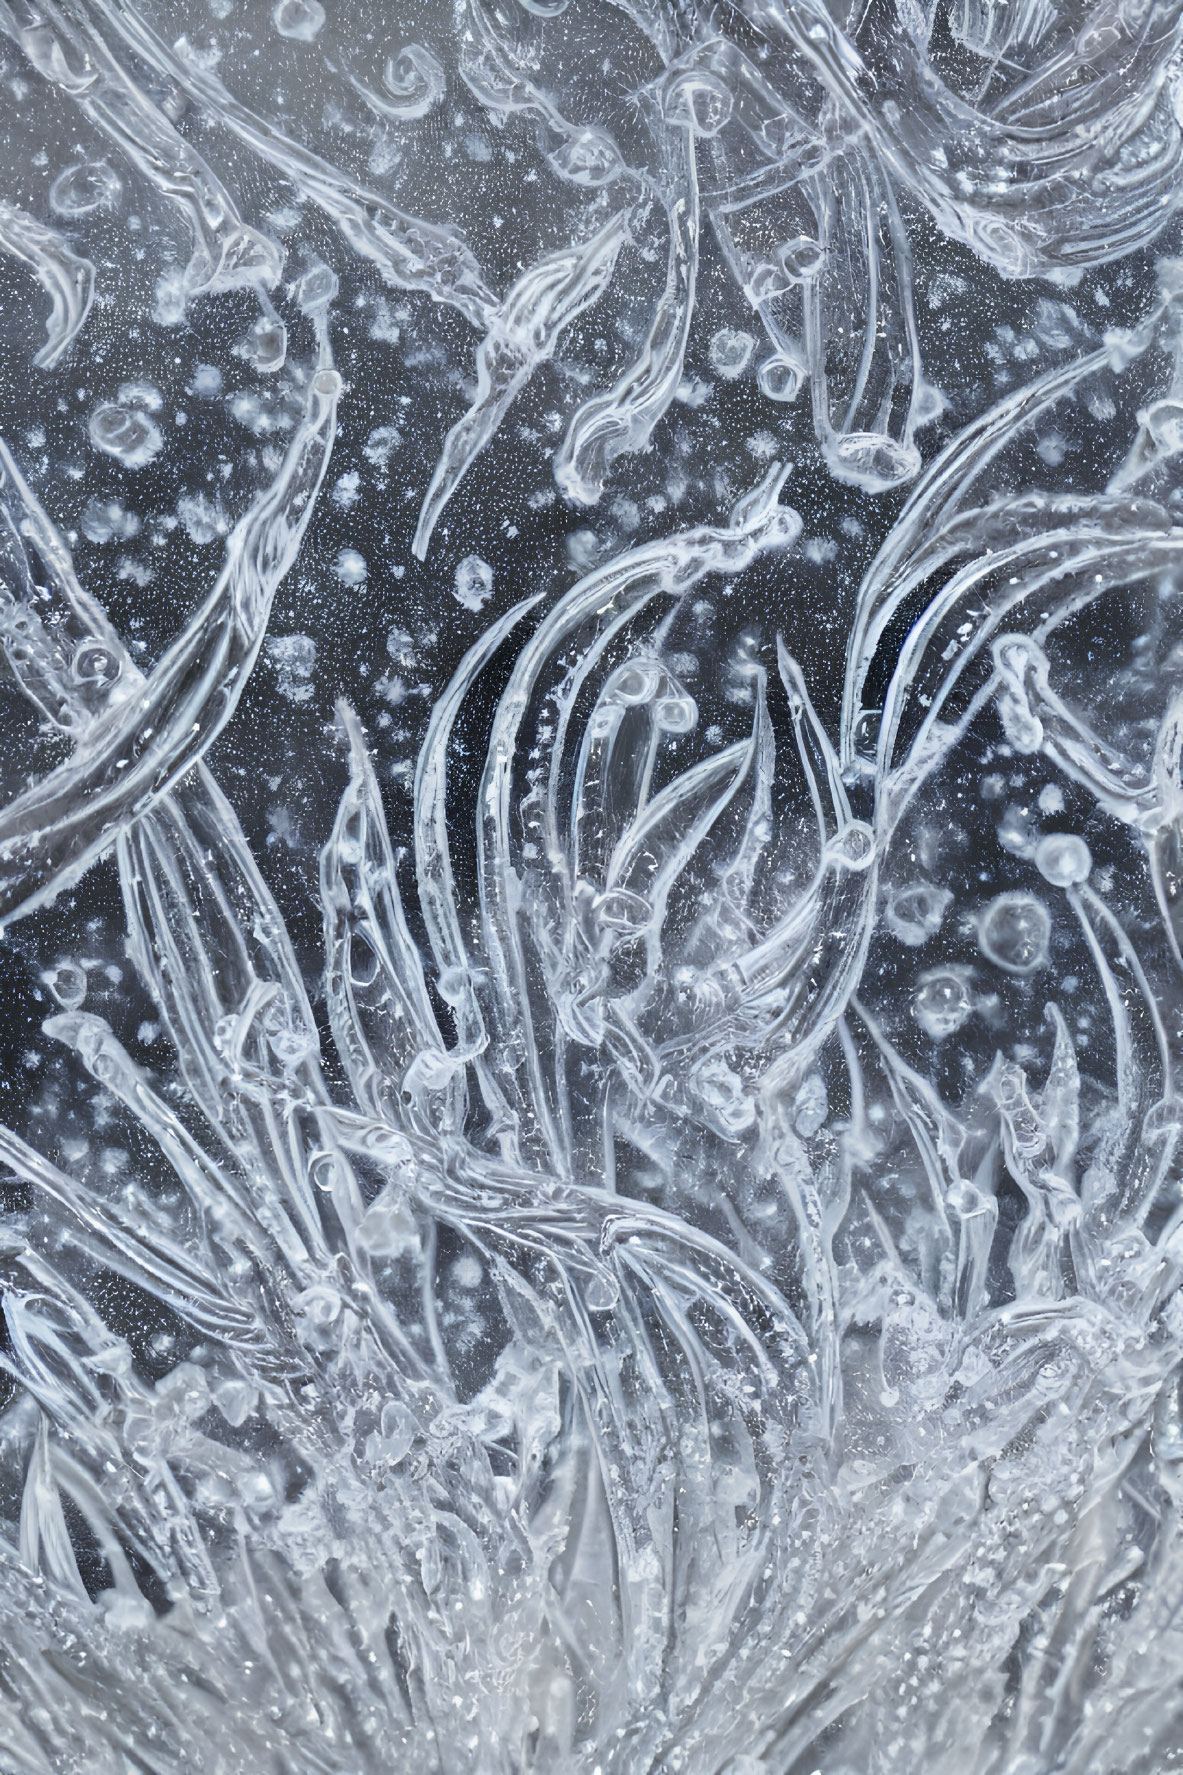 Detailed Ice Crystal Pattern with Feathery Structures and Frozen Bubbles